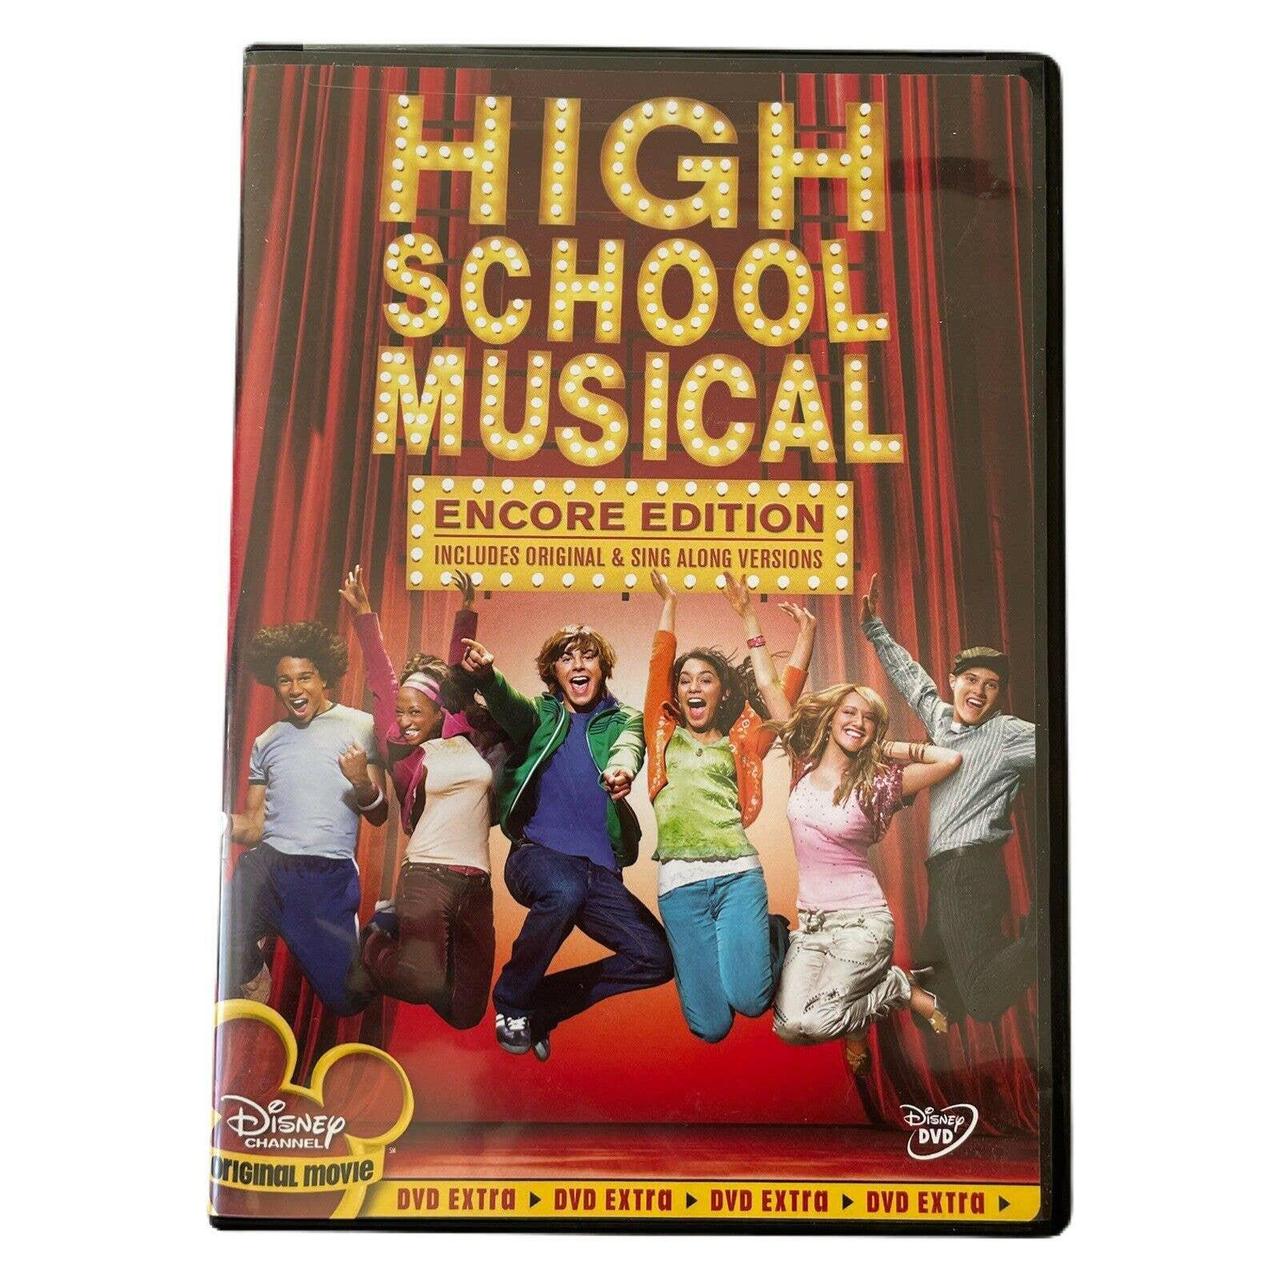 Product Image 1 - High School Musical (DVD, 2006).

Brand